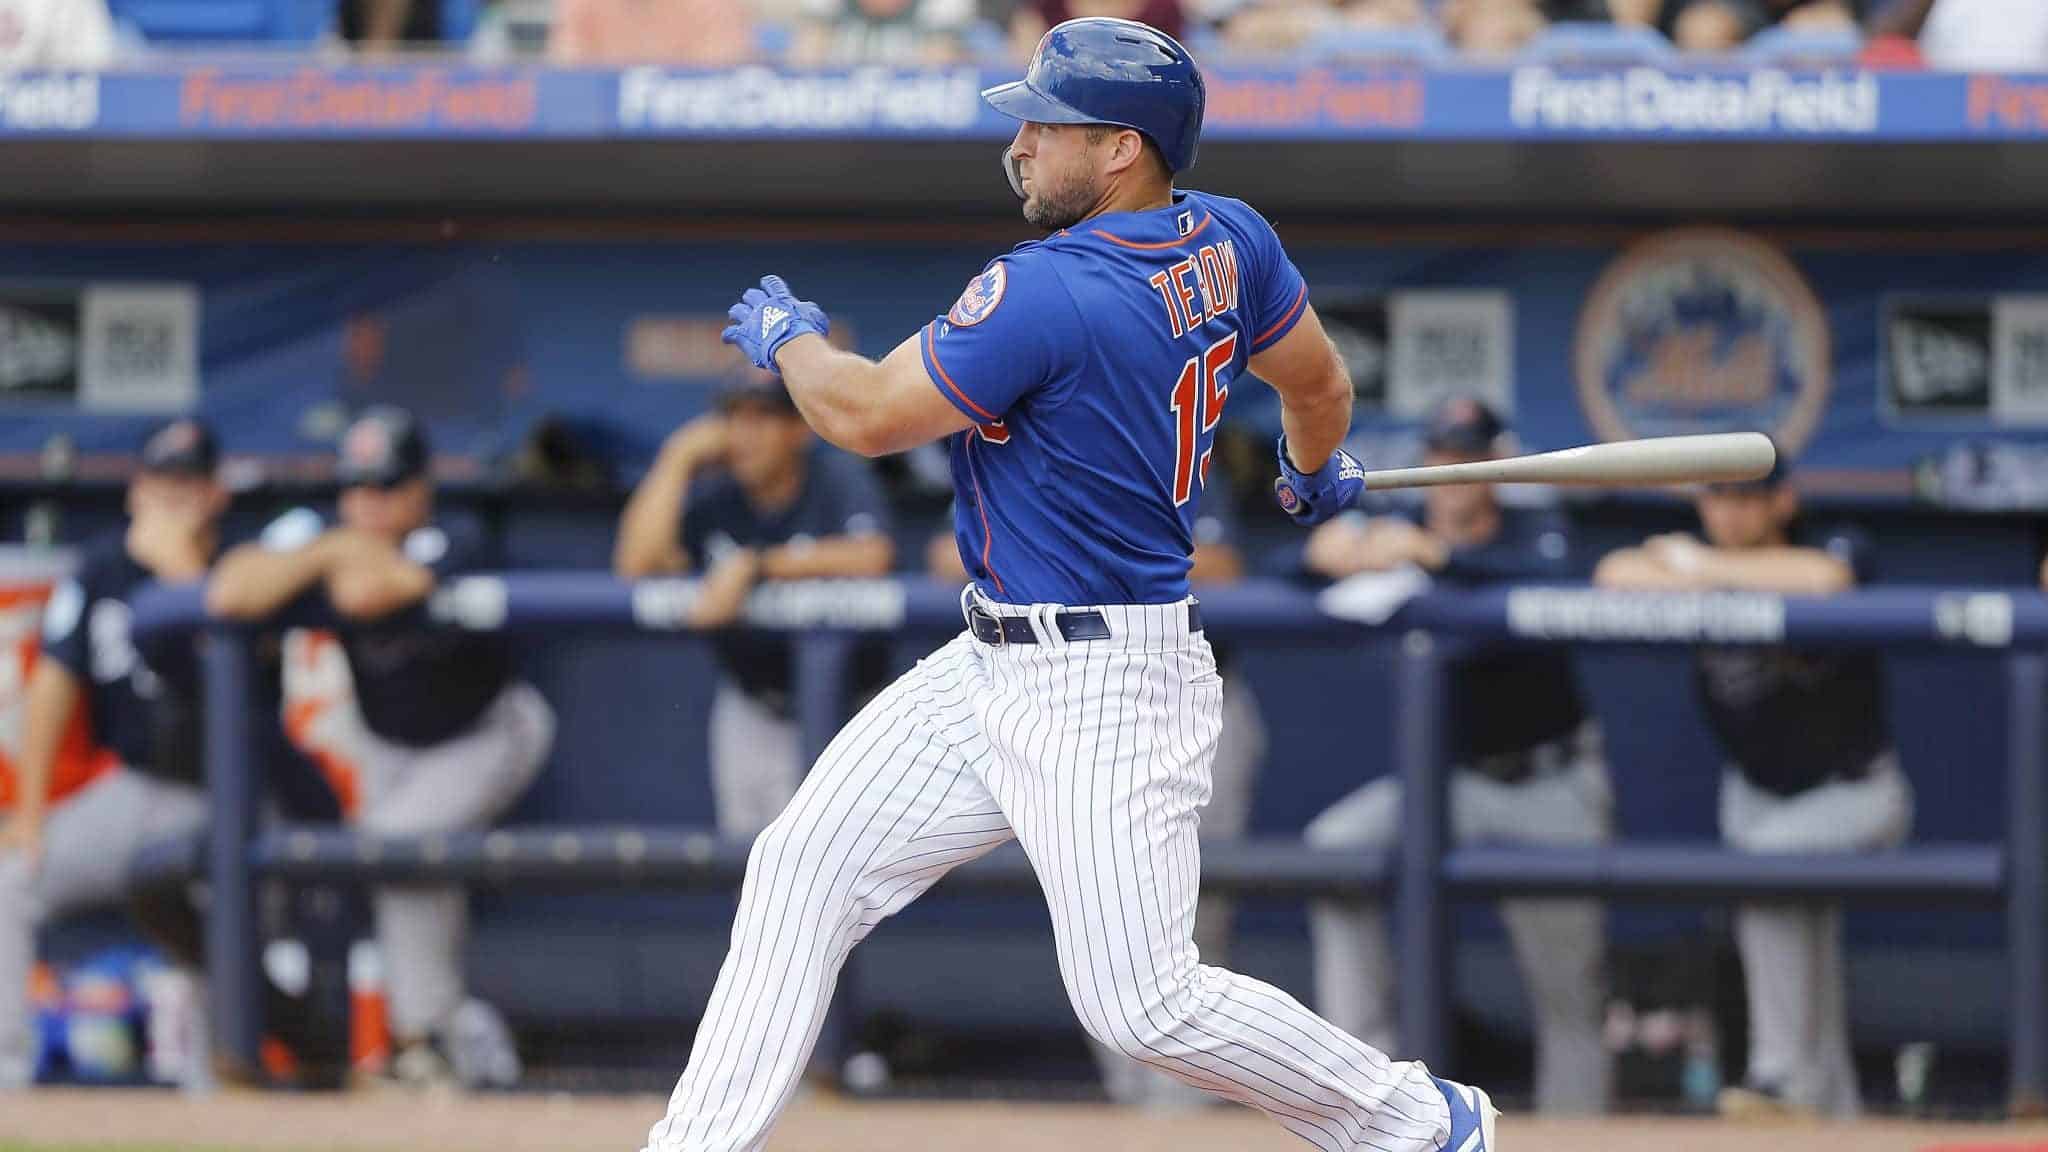 PORT ST. LUCIE, FLORIDA - FEBRUARY 23: Tim Tebow #15 of the New York Mets at bat against the Atlanta Braves during the Grapefruit League spring training game at First Data Field on February 23, 2019 in Port St. Lucie, Florida.